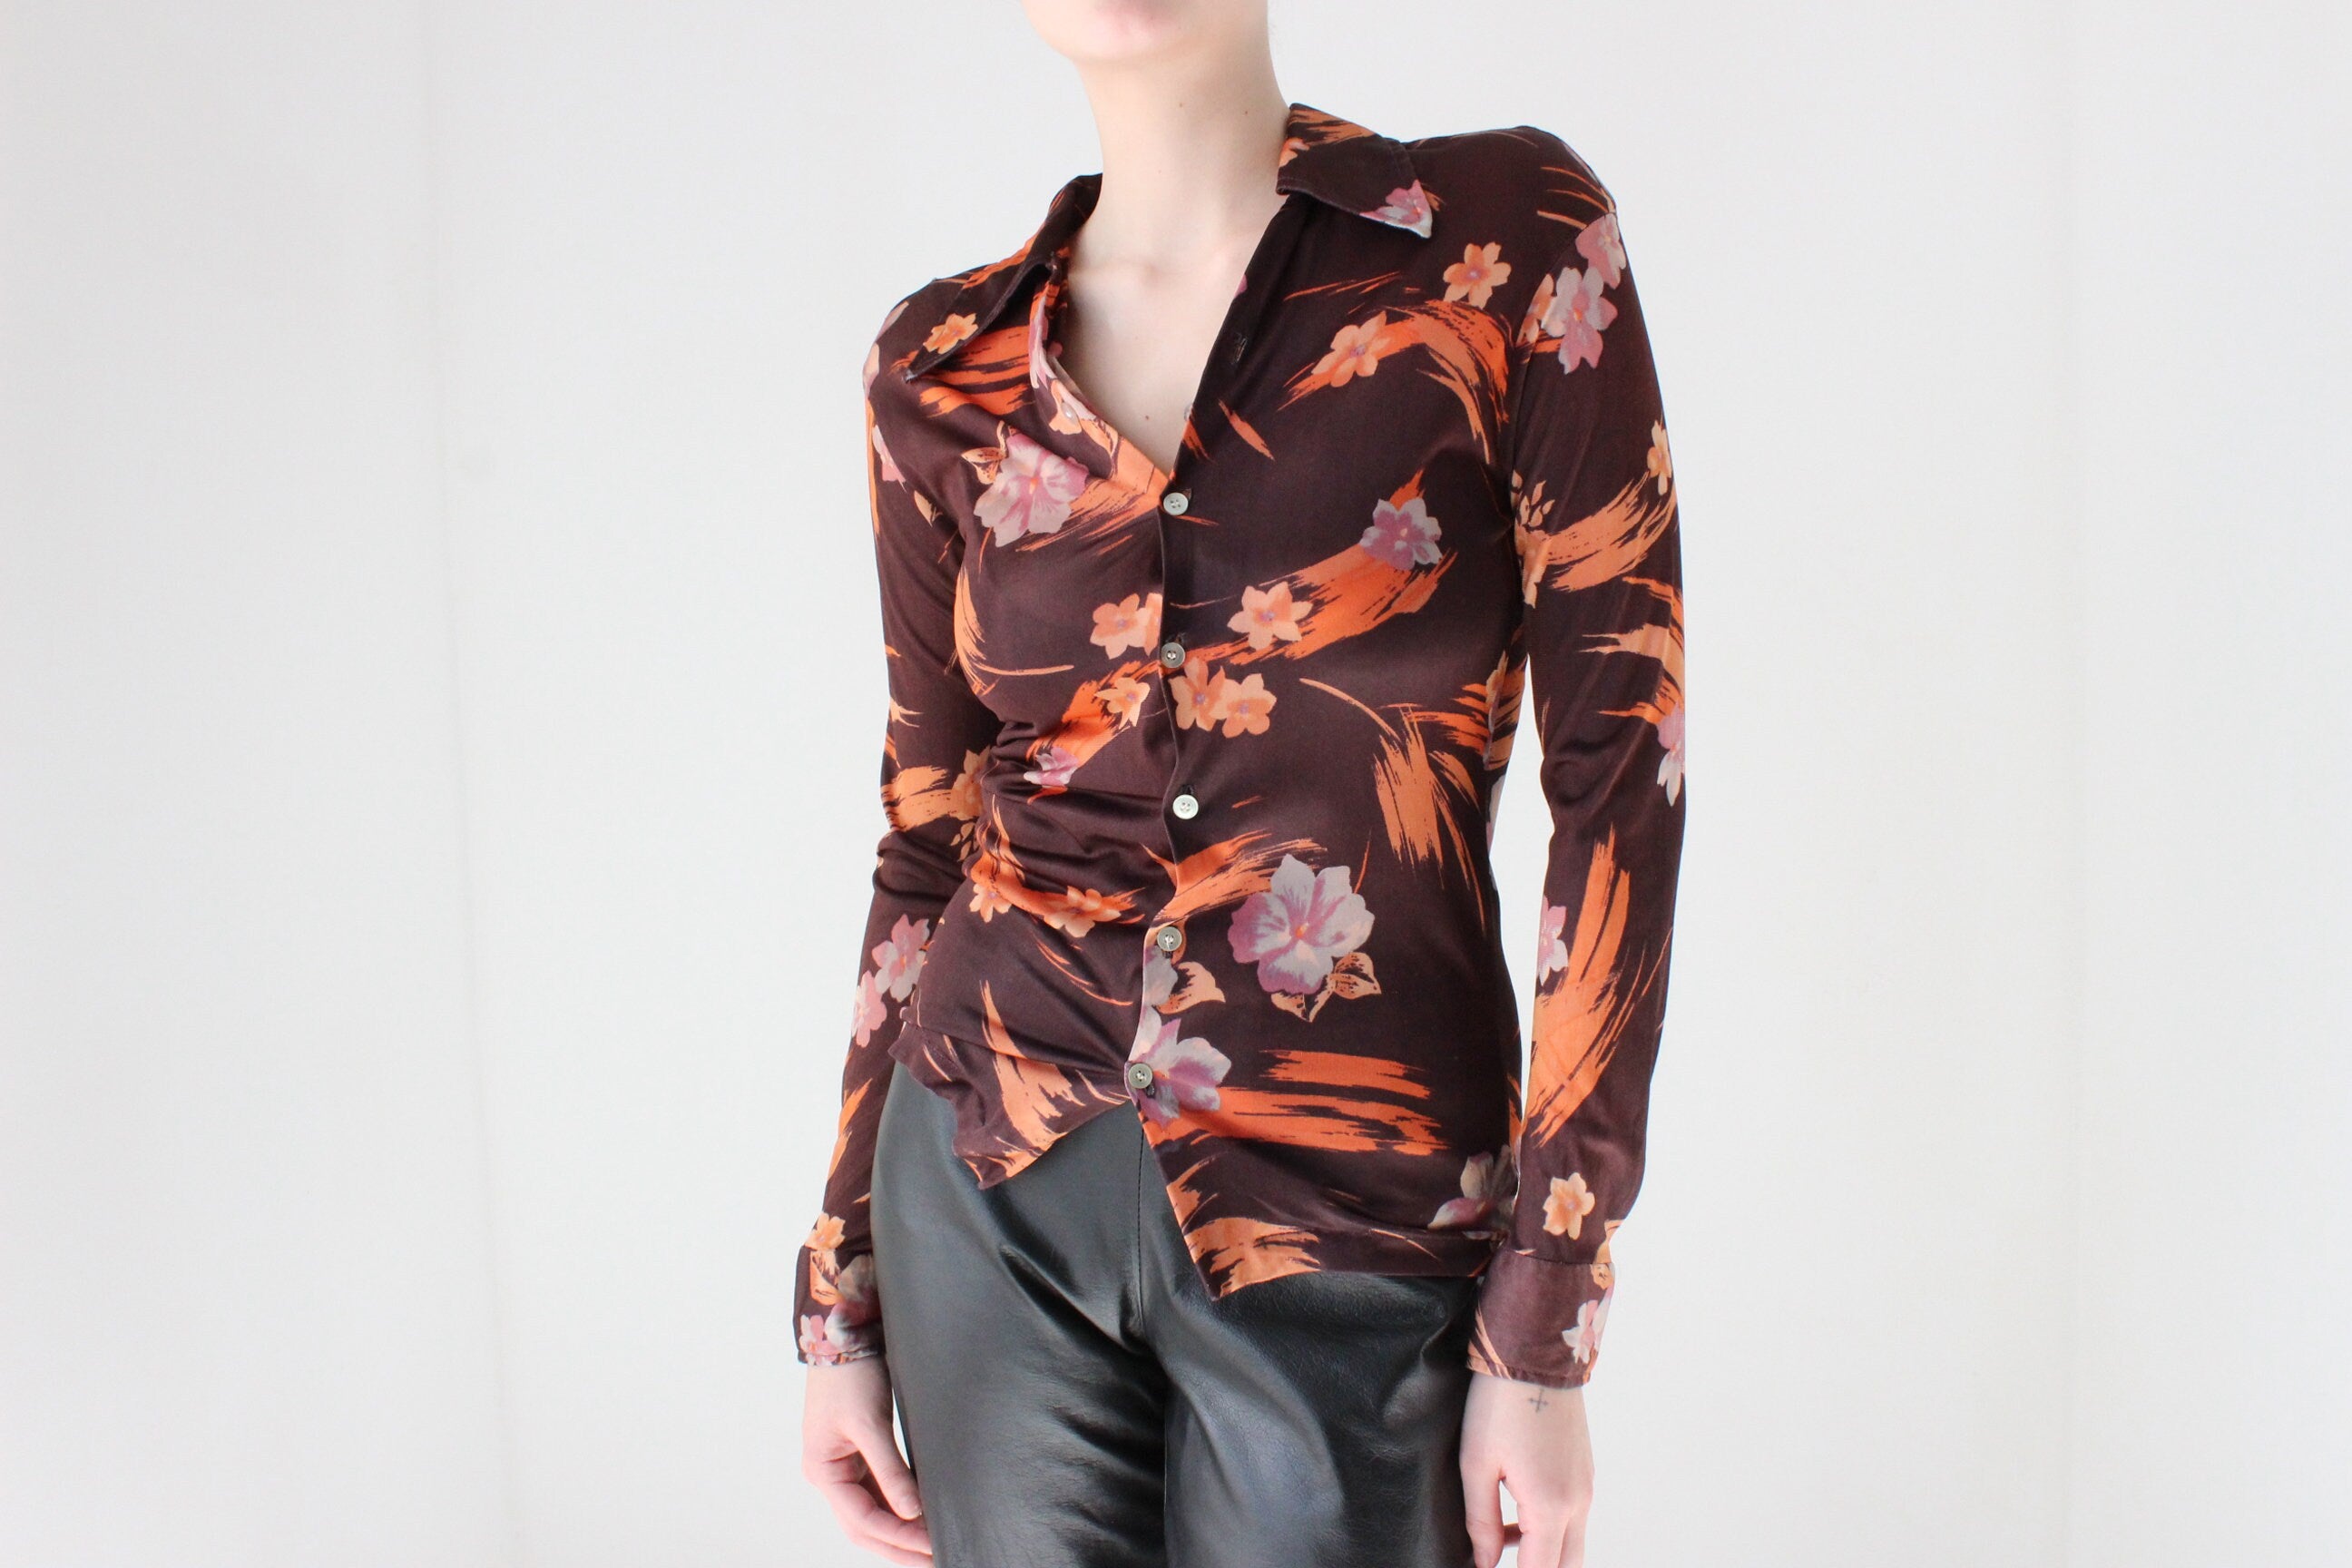 70s Disco Kitten Floral Stretch Fitted Blouse